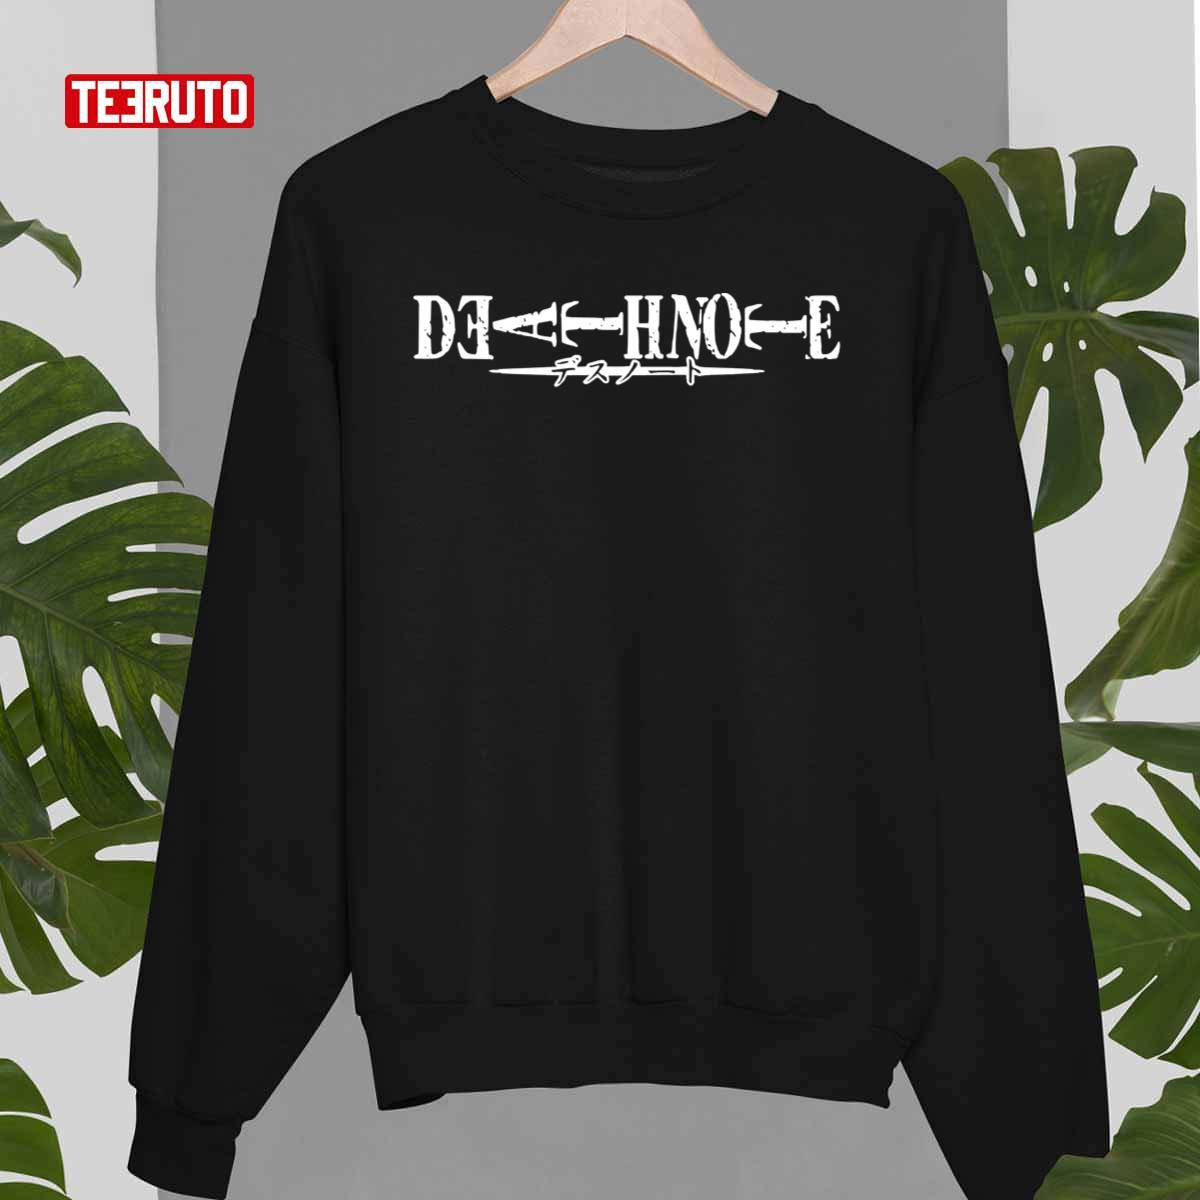 Your Time Has Come Death Note Anime Unisex Sweatshirt